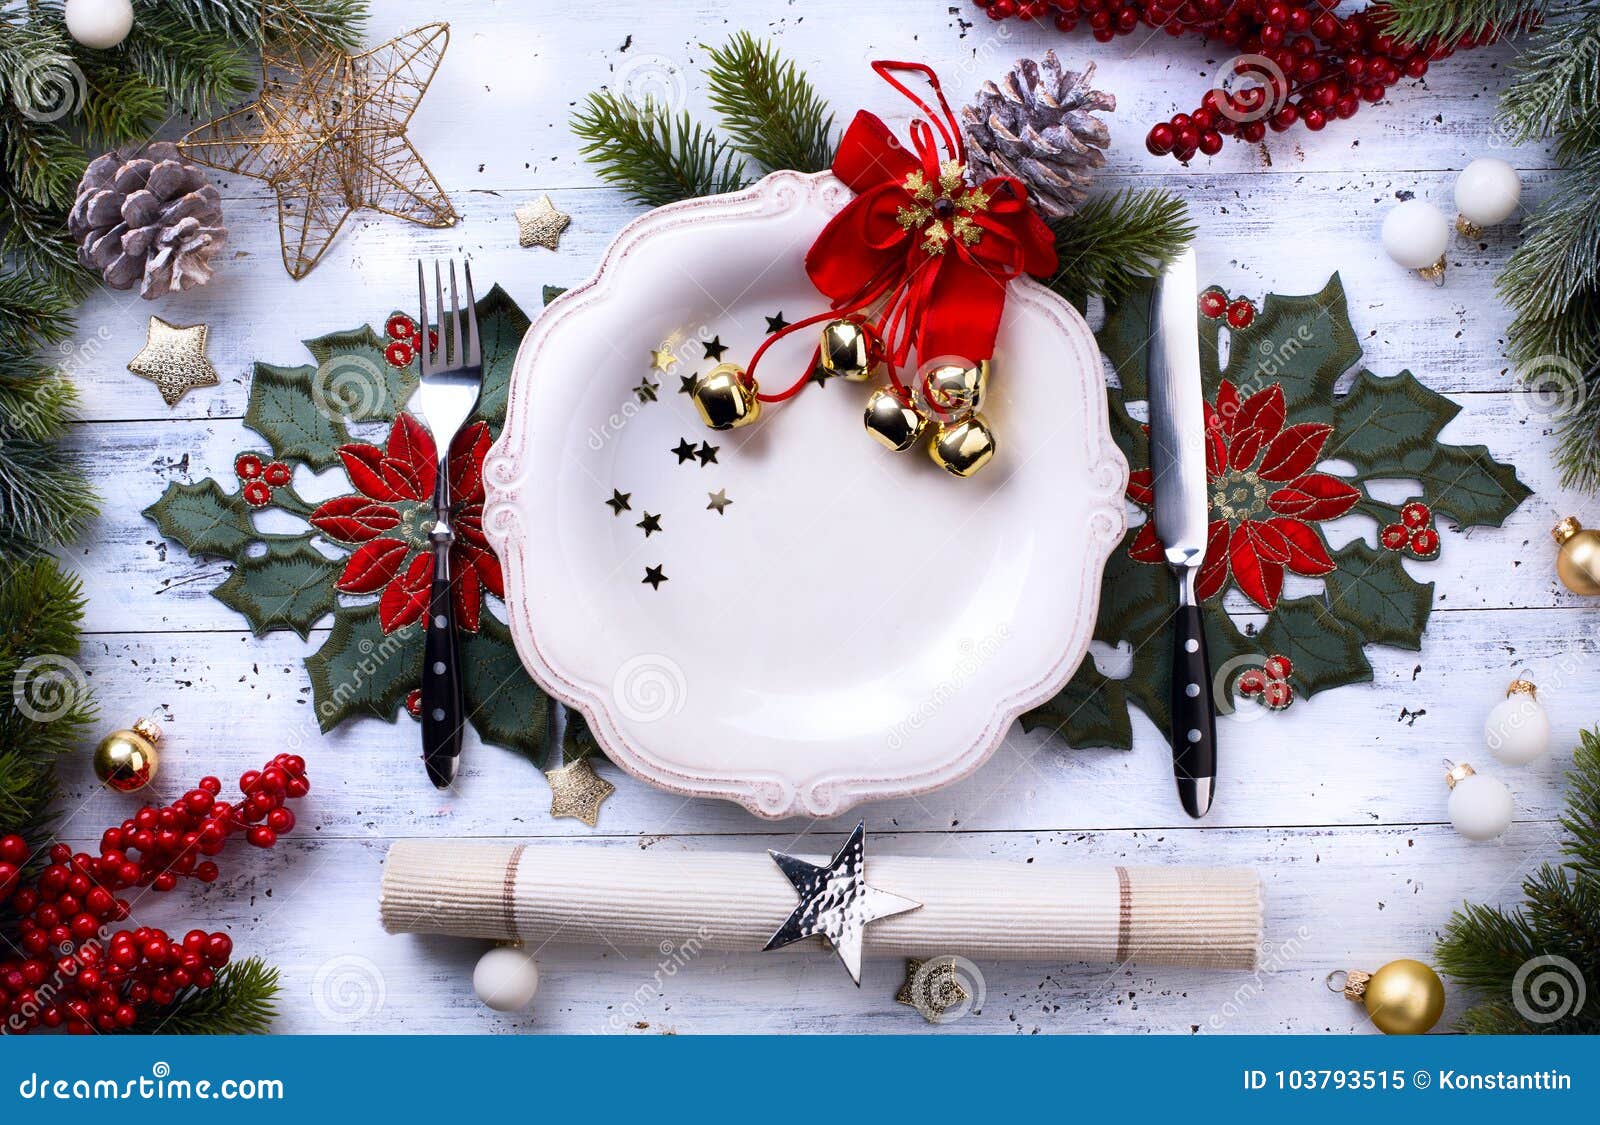 Christmas Holiday Dinner Background Stock Image - Image of view ...